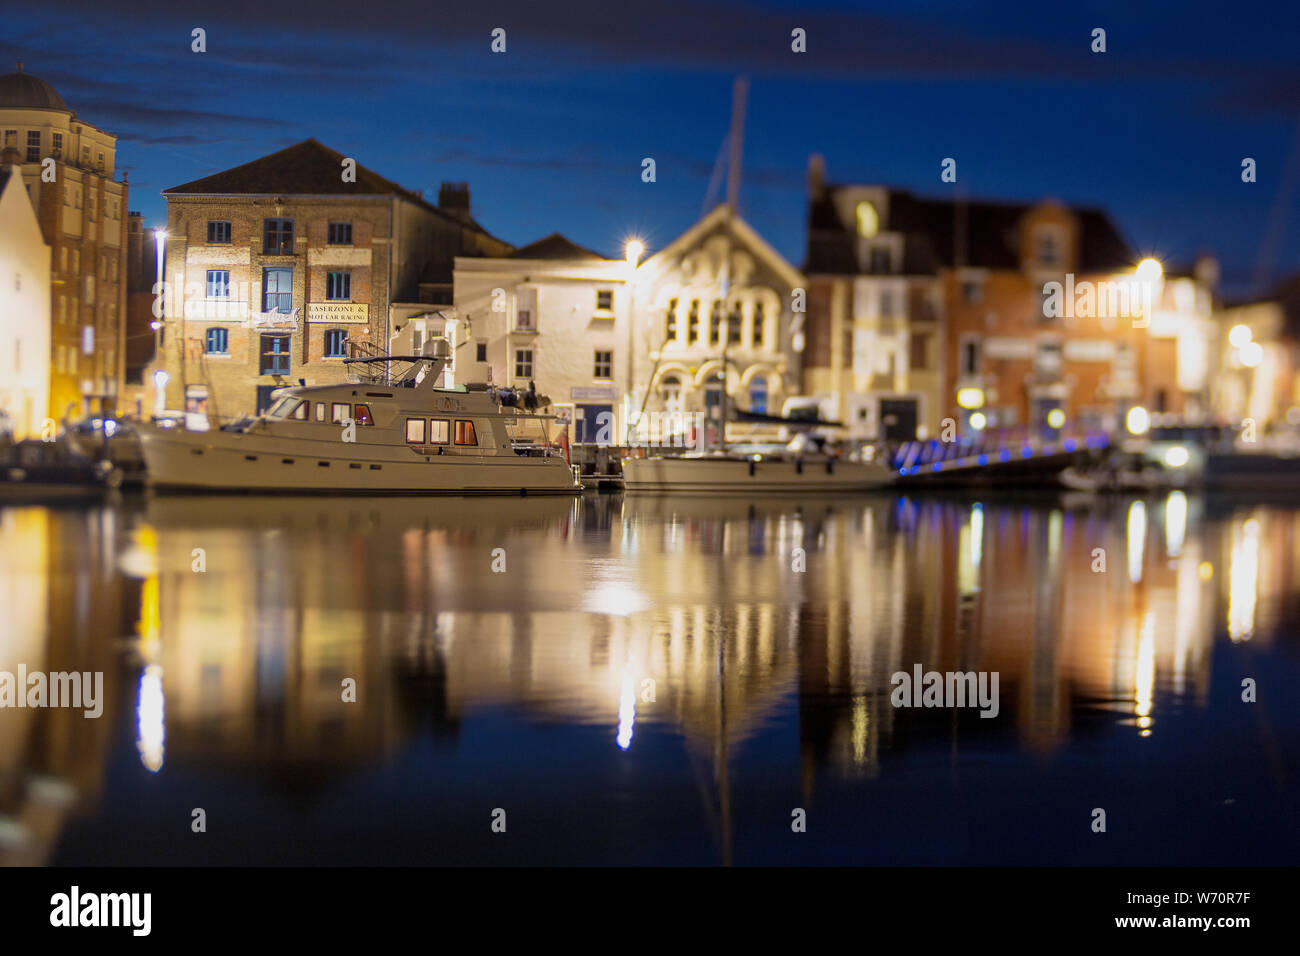 A night time shot of boats moored alongside Custom House Quay in Weymouth's Outer Harbour taken with a lensbaby lens Stock Photo